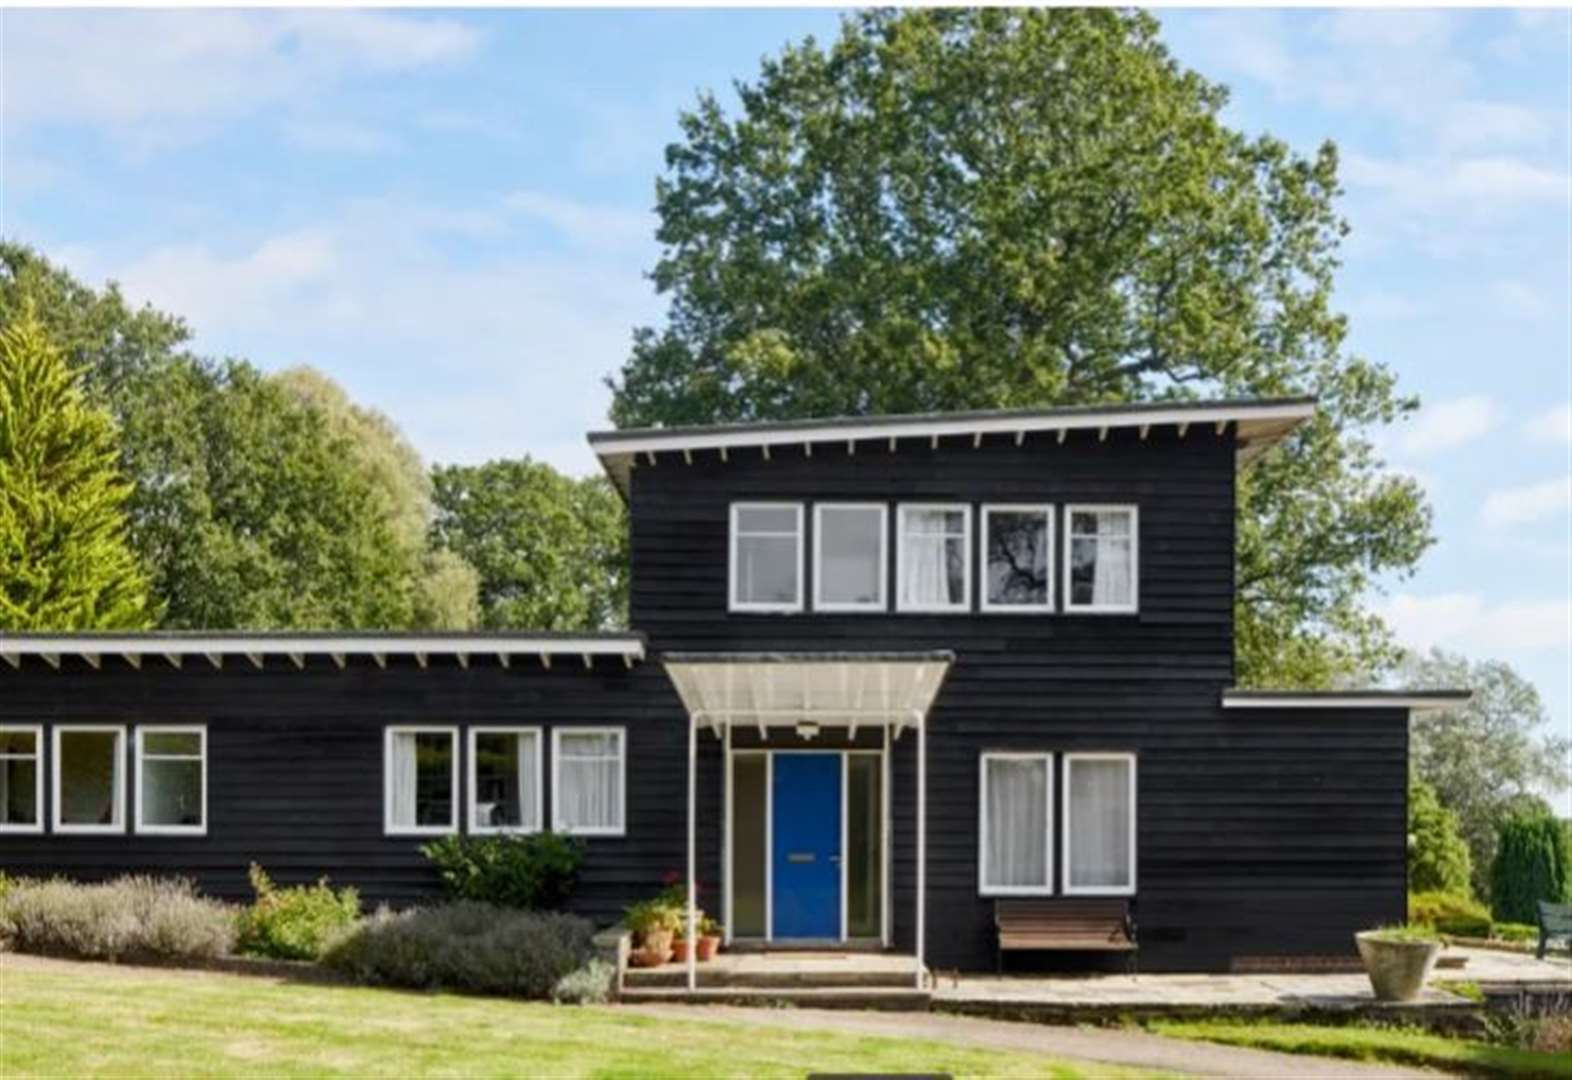 One of a kind: Quirky £2.5m designer home up for sale